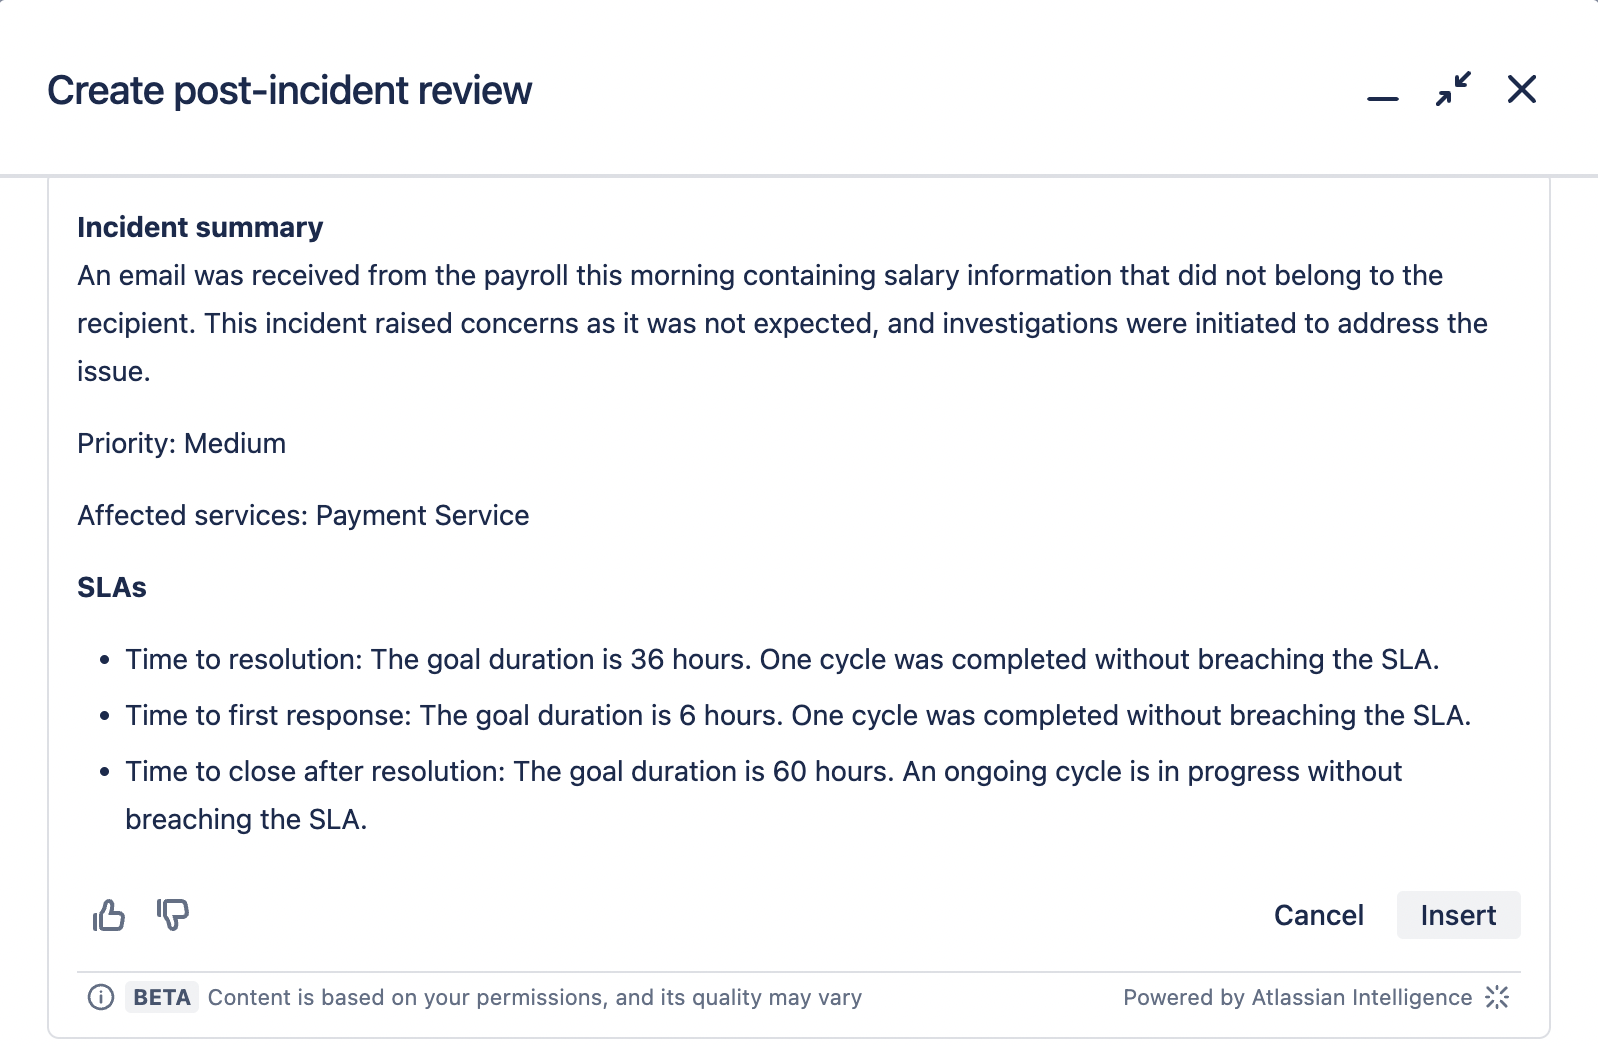 Post-incident review created using Atlassian Intelligence in Jira Service Management.